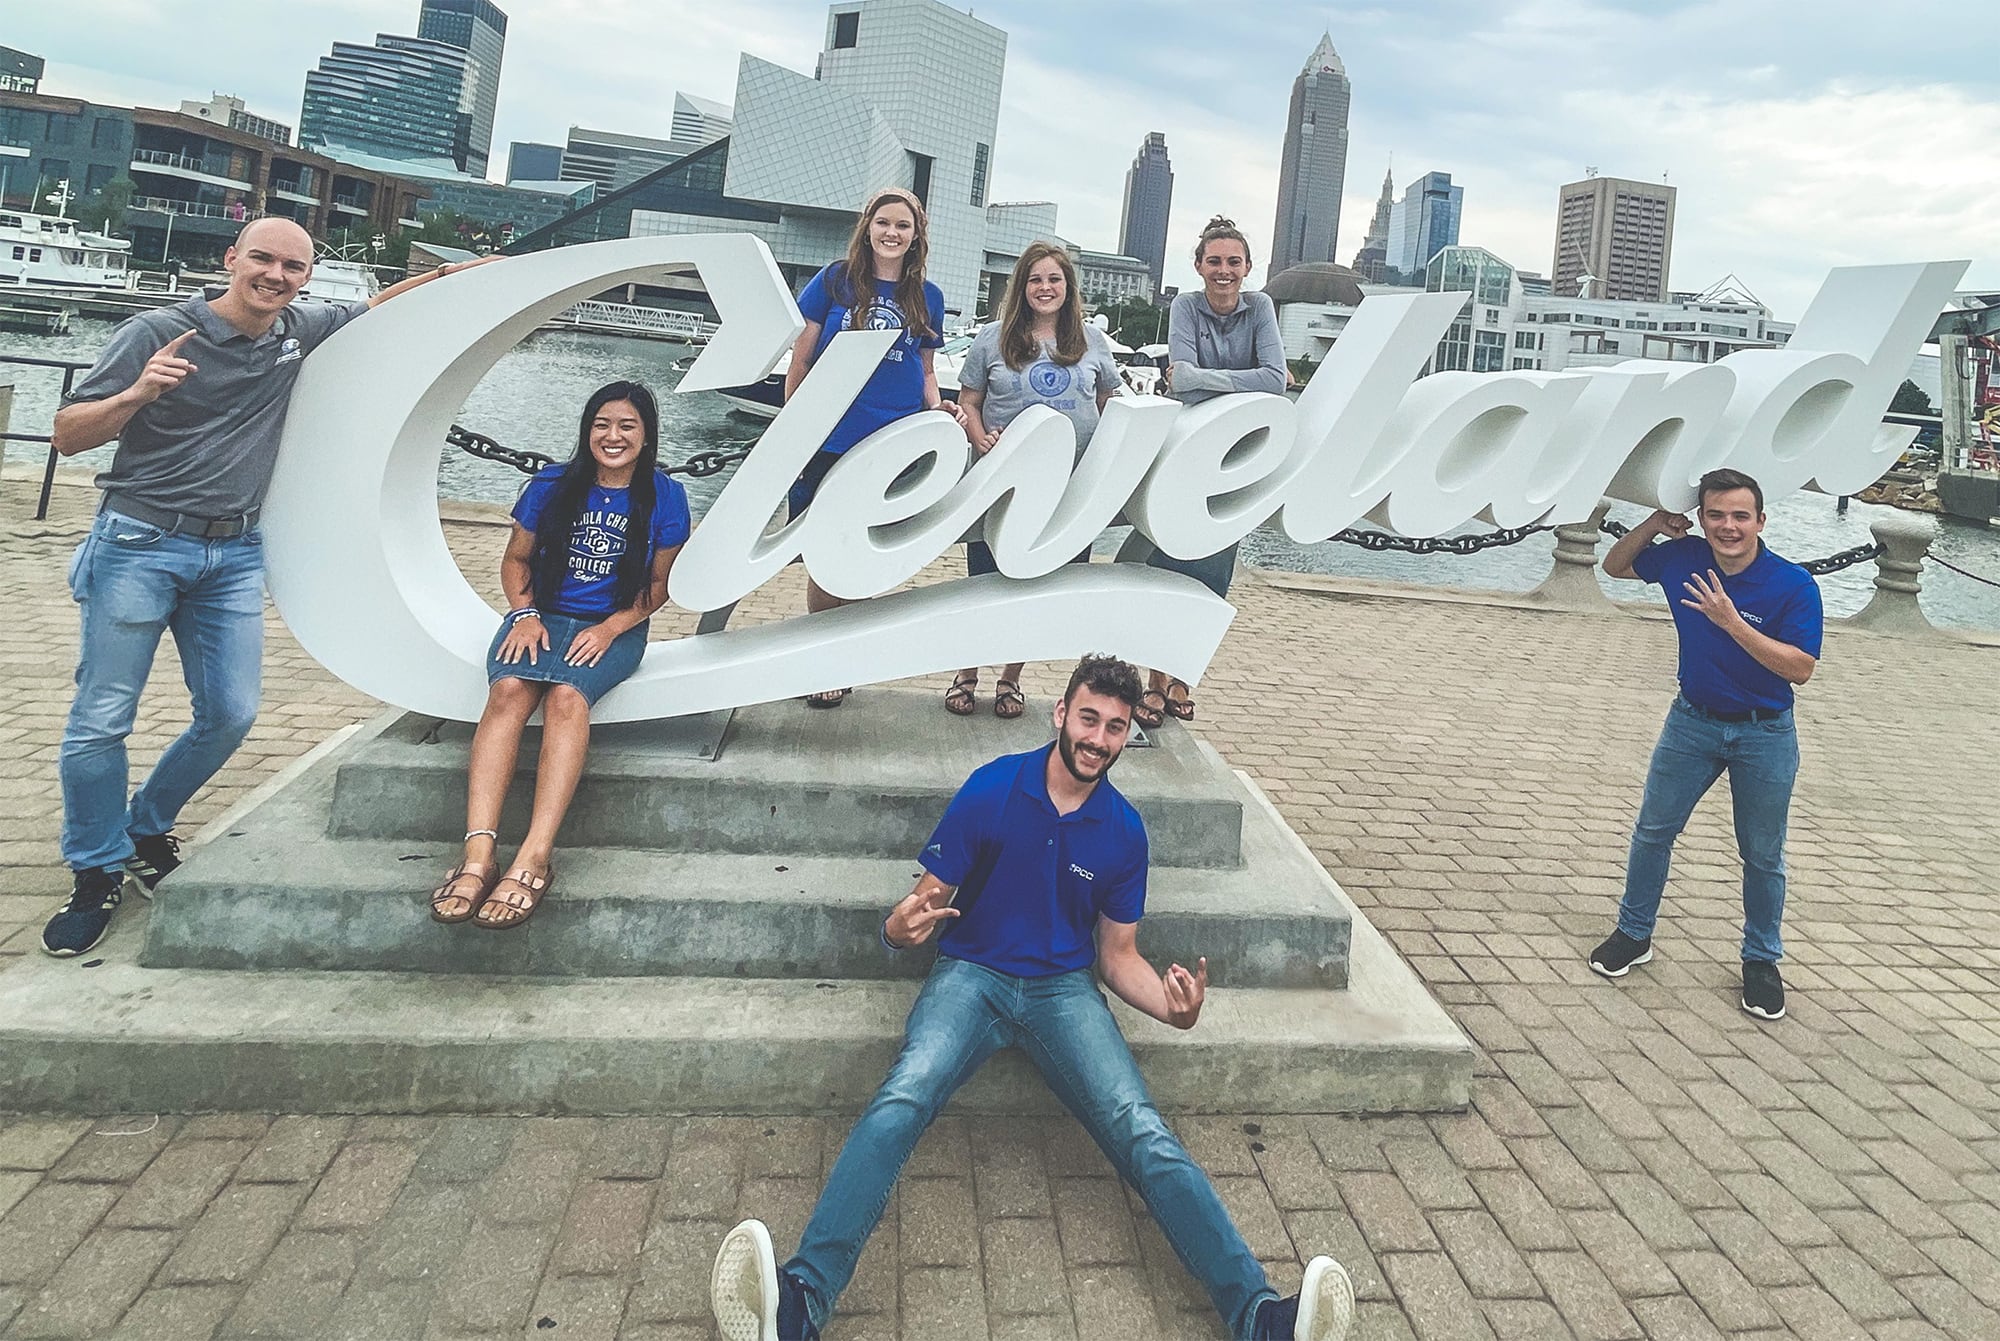 Mark Brown Proclaim team posing with Cleveland sign.